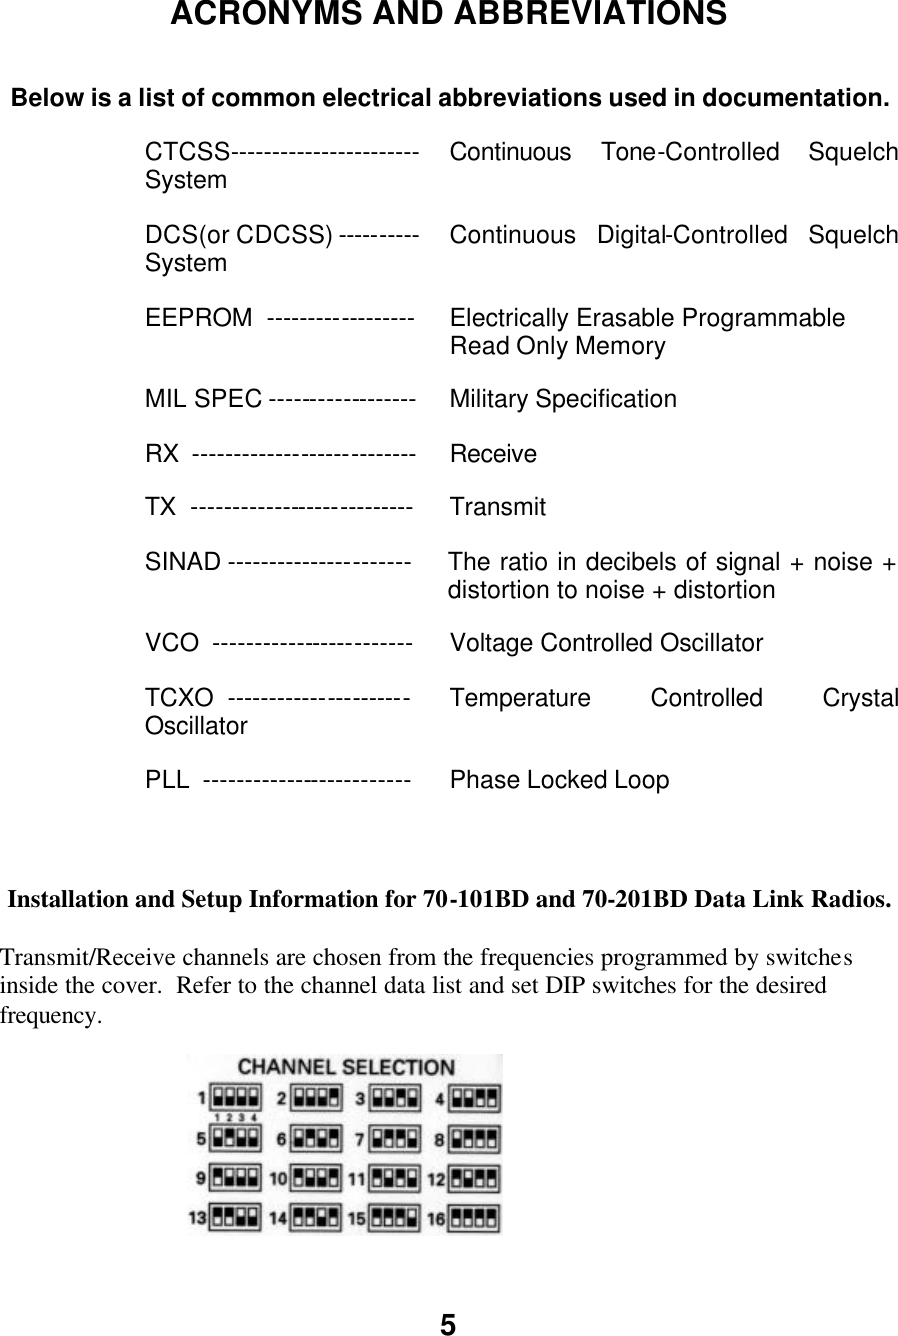 5   ACRONYMS AND ABBREVIATIONS  Below is a list of common electrical abbreviations used in documentation. CTCSS----------------------- Continuous Tone-Controlled Squelch System  DCS(or CDCSS) ---------- Continuous Digital-Controlled Squelch System  EEPROM  ------------------ Electrically Erasable Programmable Read Only Memory MIL SPEC ------------------ Military Specification RX  --------------------------- Receive TX  --------------------------- Transmit SINAD ---------------------- The ratio in decibels of signal + noise + distortion to noise + distortion VCO  ------------------------ Voltage Controlled Oscillator TCXO  ---------------------- Temperature Controlled Crystal Oscillator  PLL  ------------------------- Phase Locked Loop    Installation and Setup Information for 70-101BD and 70-201BD Data Link Radios.  Transmit/Receive channels are chosen from the frequencies programmed by switches inside the cover.  Refer to the channel data list and set DIP switches for the desired frequency.  